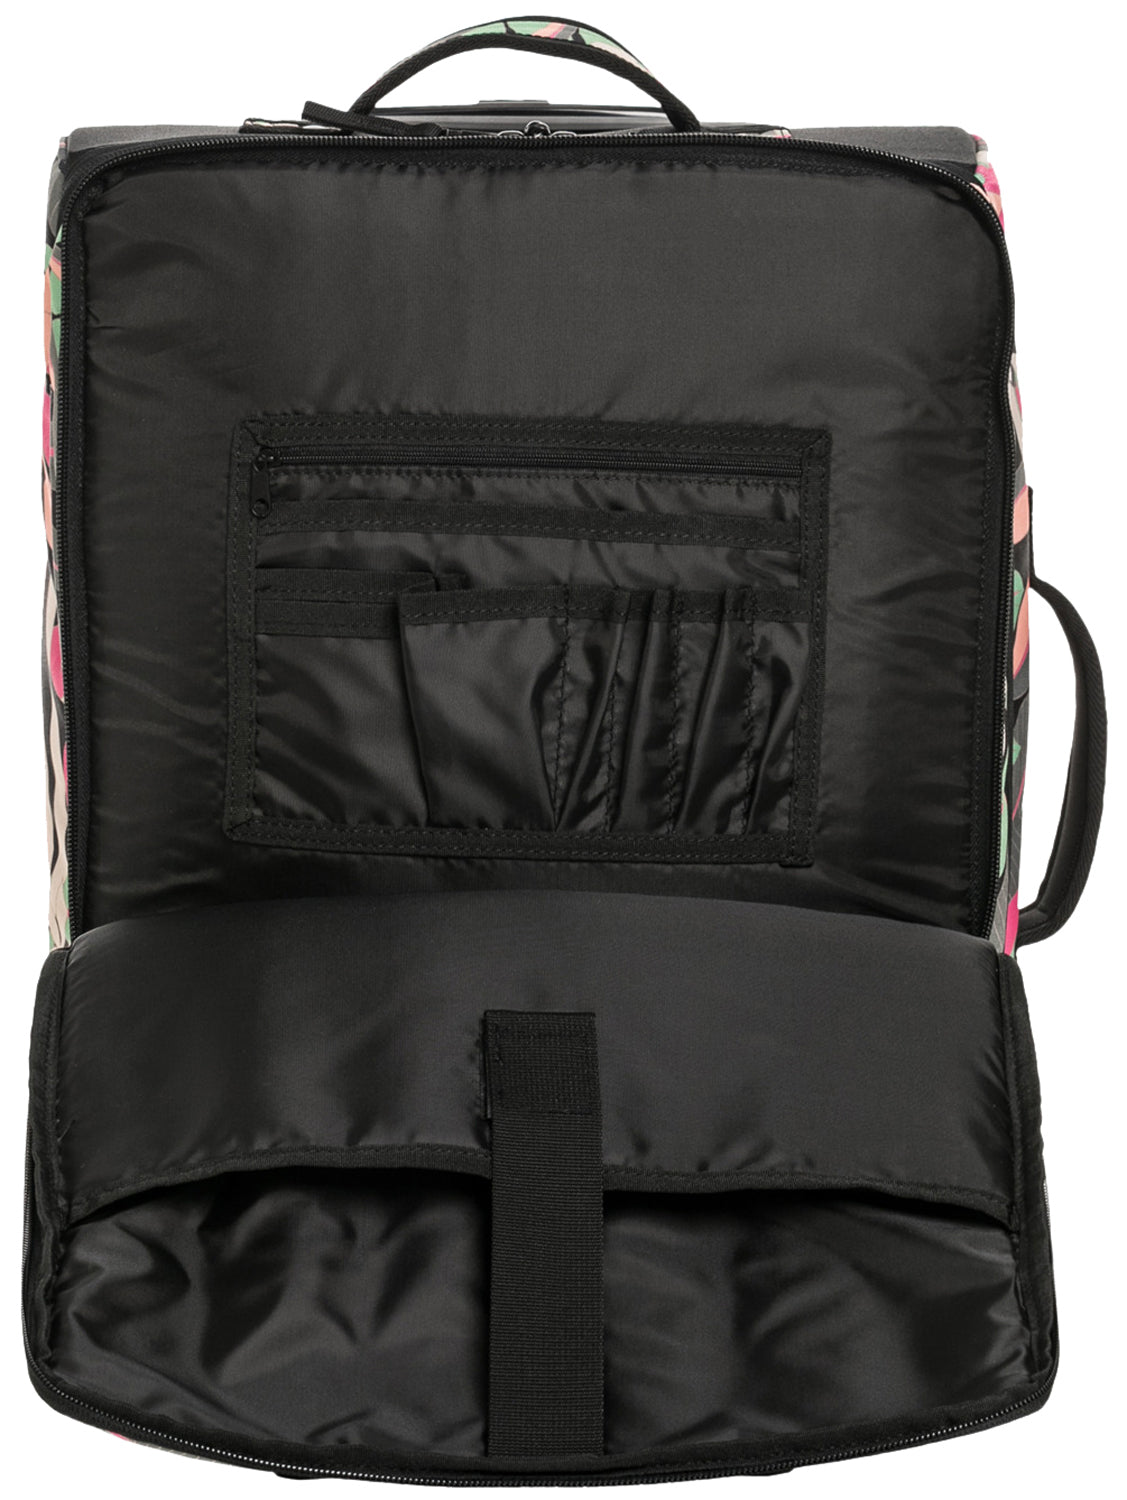 Roxy Cabin Paradise Suitcase - Anthracite Palm Song